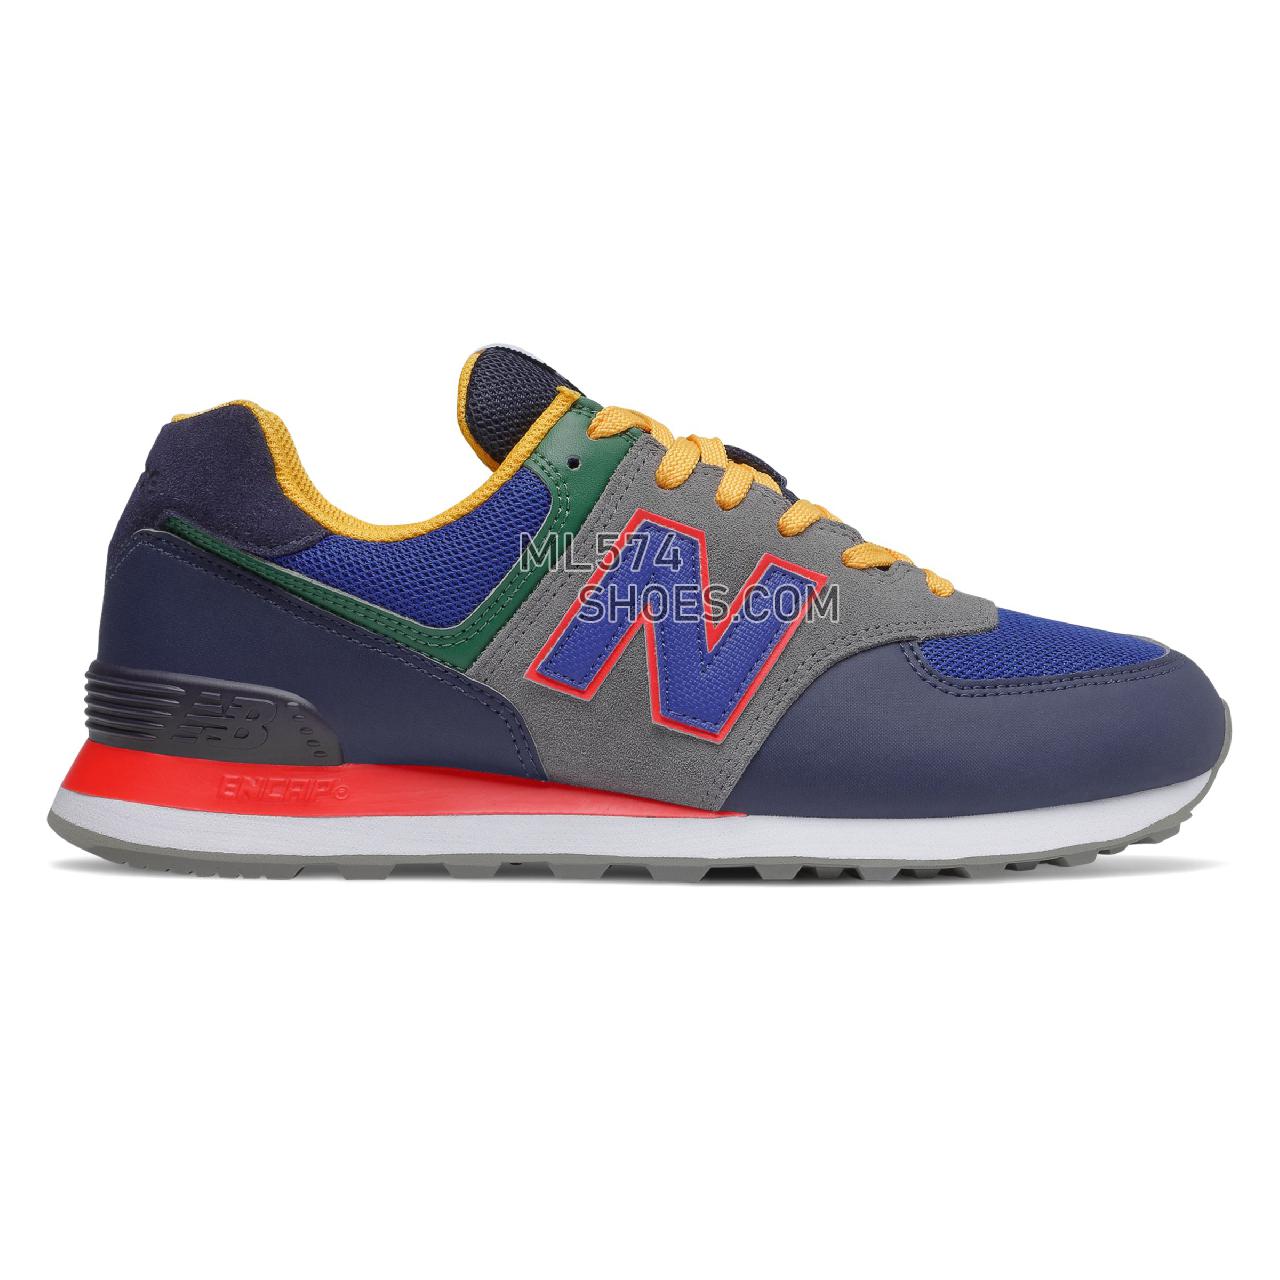 New Balance 574v2 - Men's Classic Sneakers - Pigment with Energy Red - ML574MD2